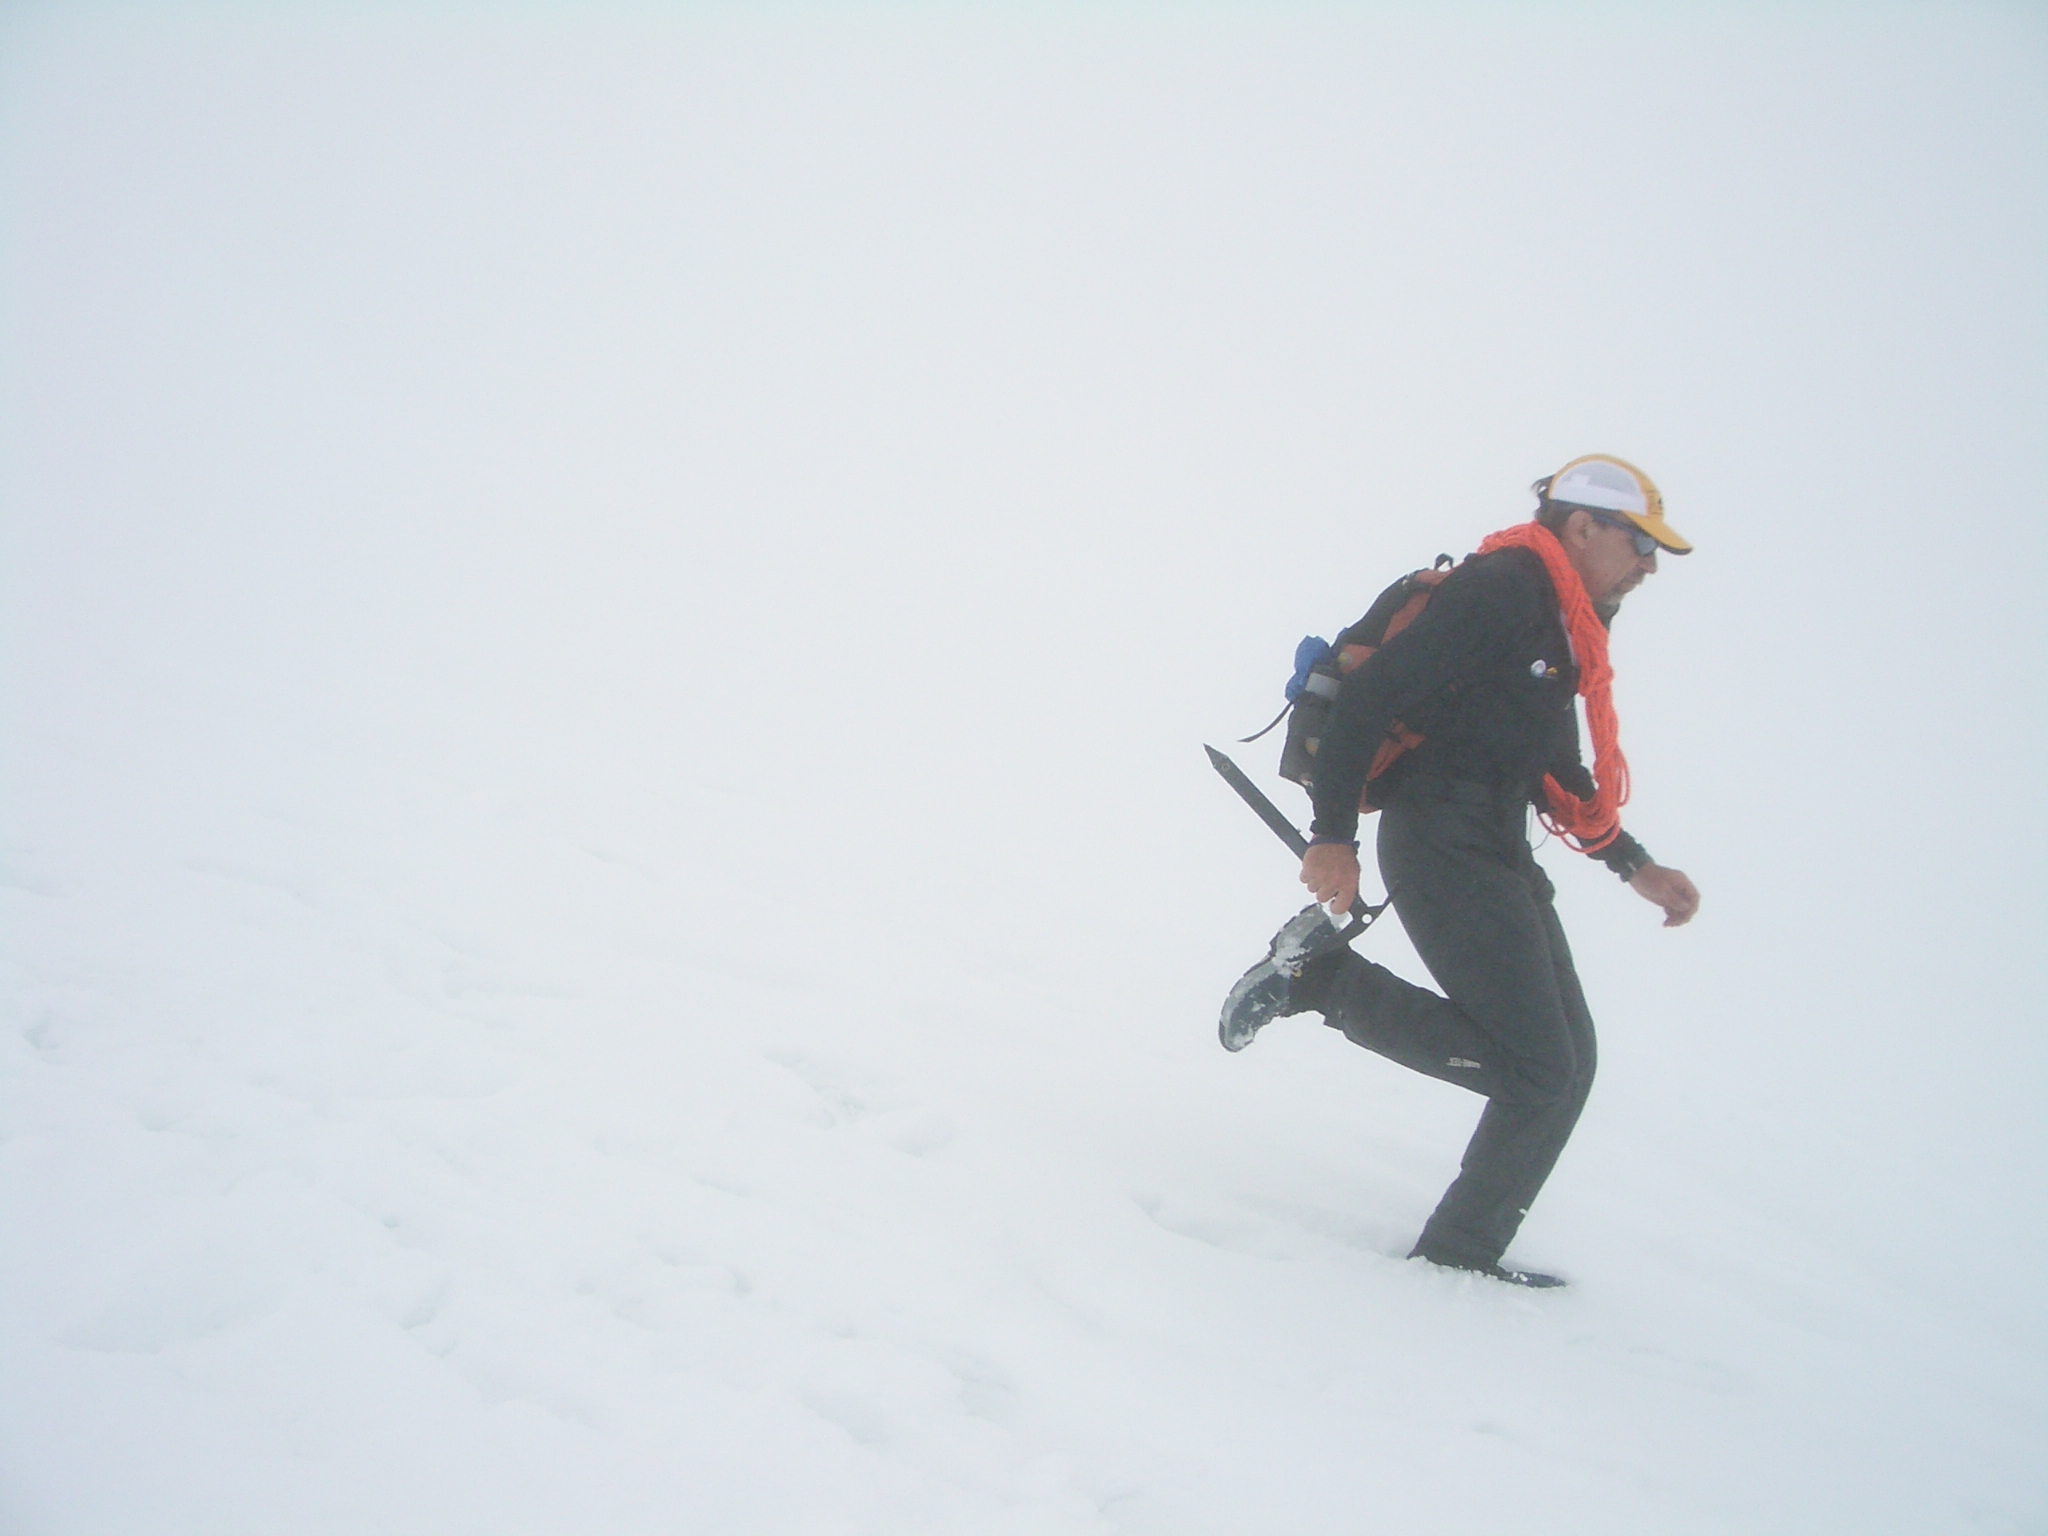 Buzz runs down a snow slope in a white-out. He's carrying an ice ax, shouldering a cord of rope, and wearing a backpack.